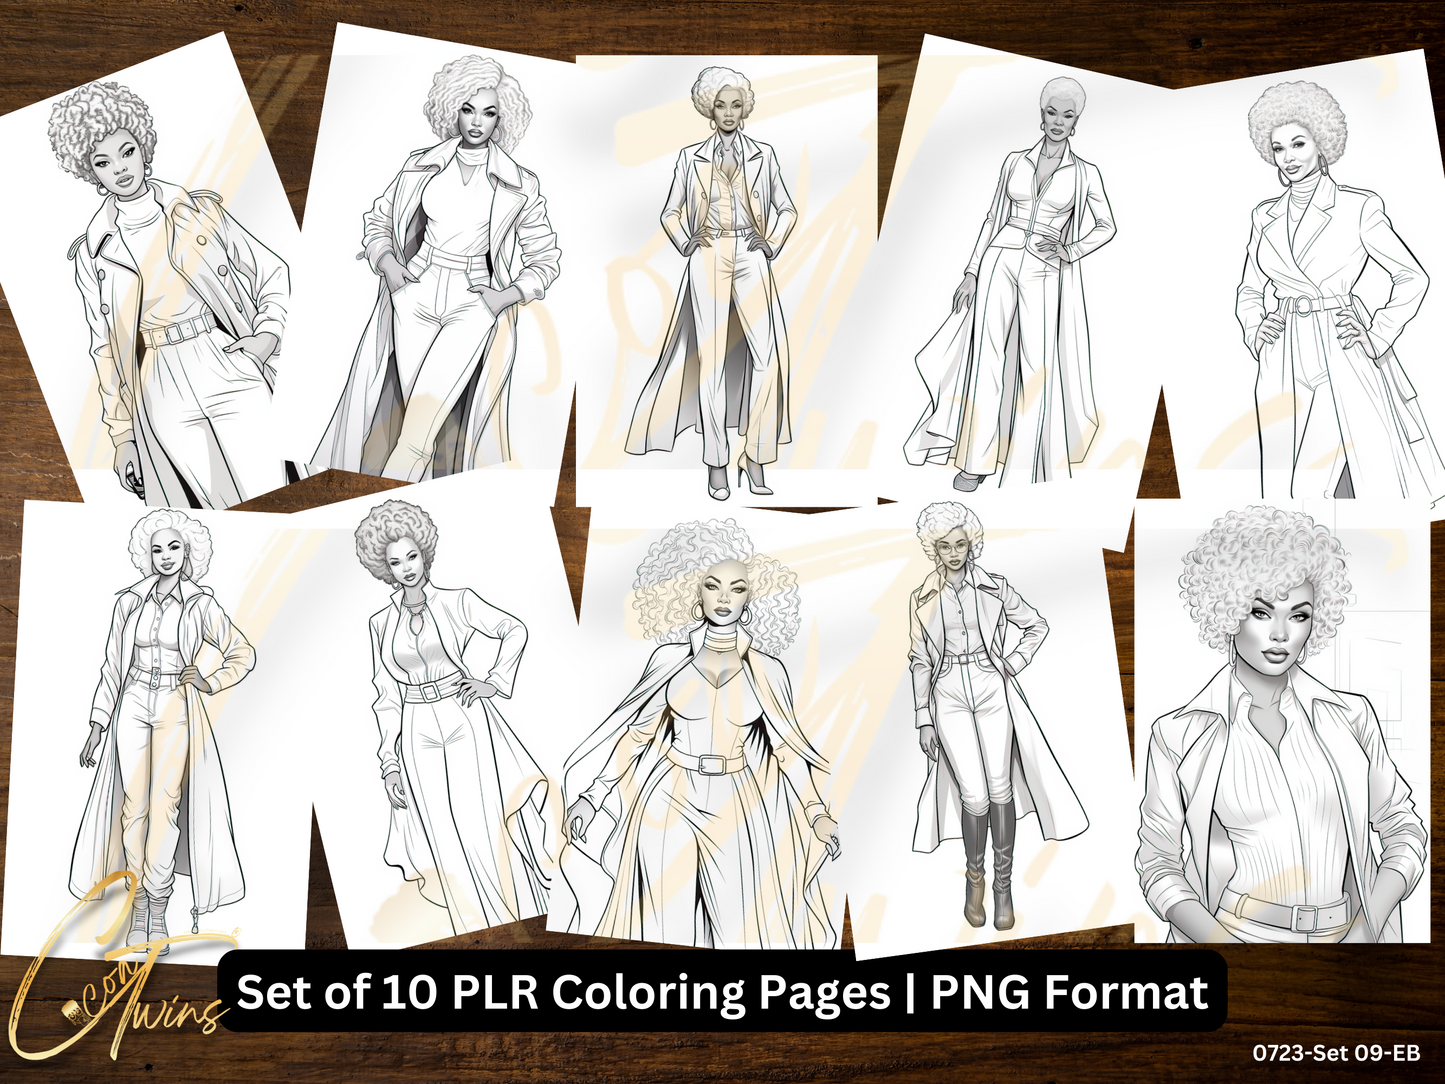 Limited Edition | PLR Coloring Pages | Set 09-EB (0723)